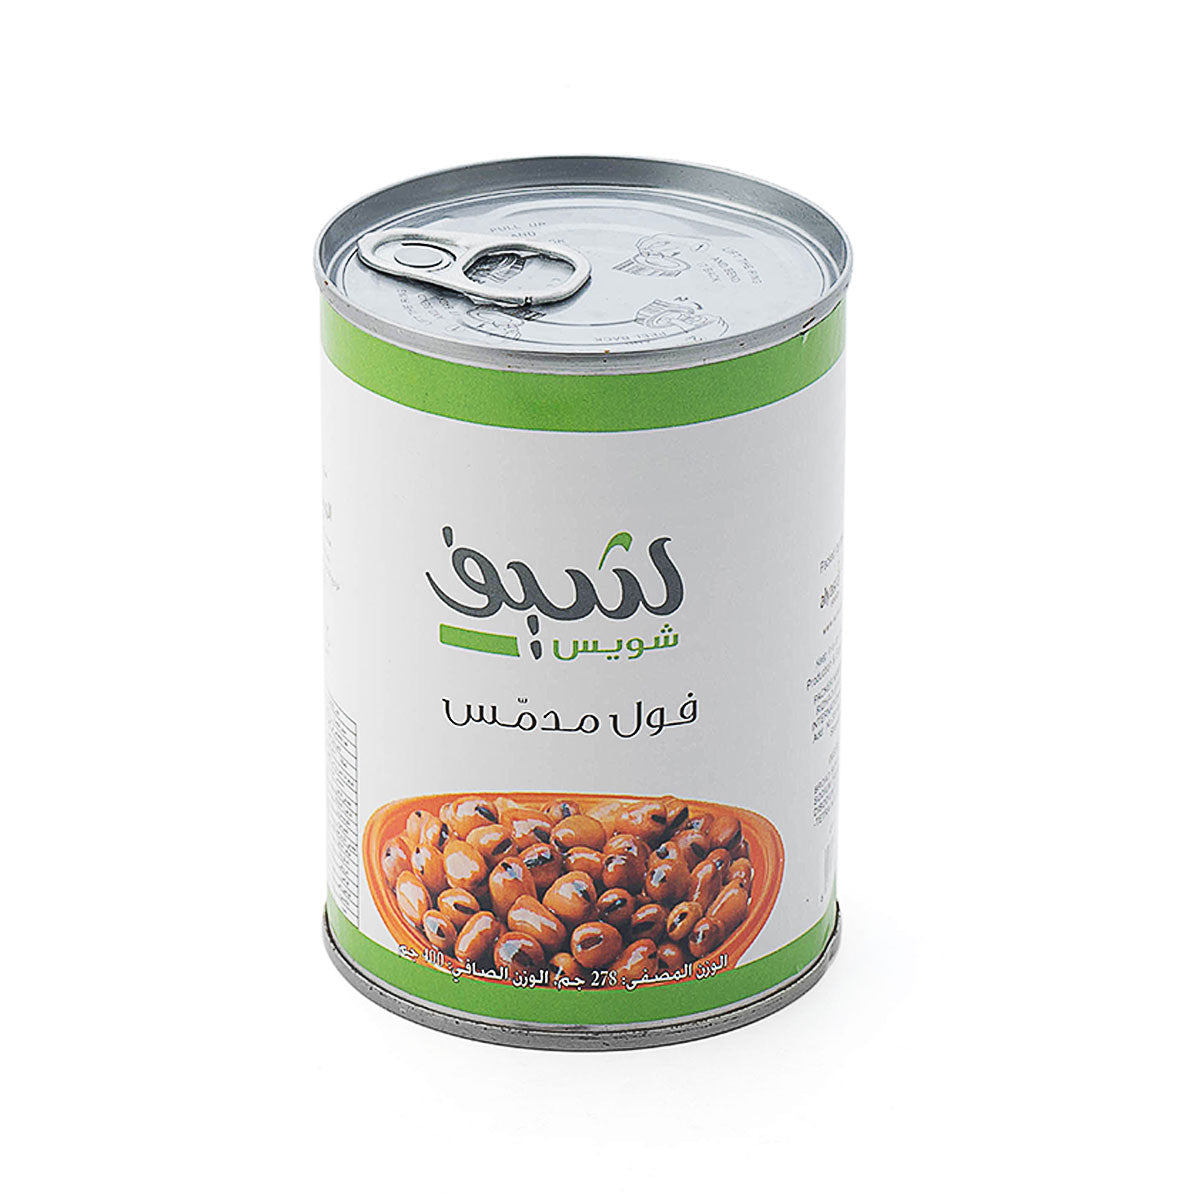 Foul Medames "Broad Beans" 400g - Chef's Choice